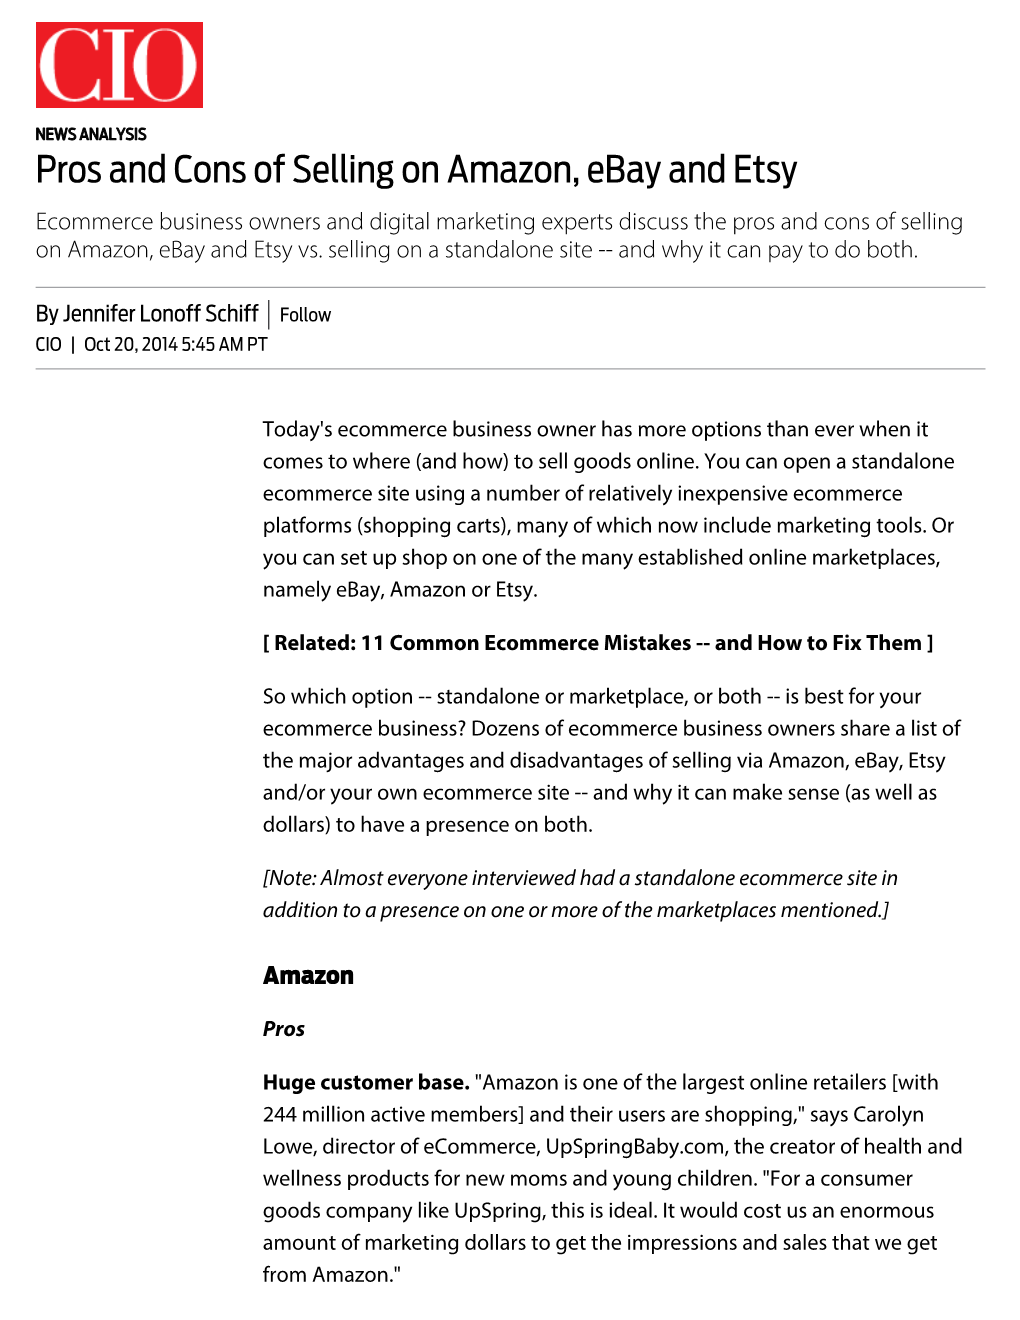 Pros and Cons of Selling on Amazon, Ebay and Etsy